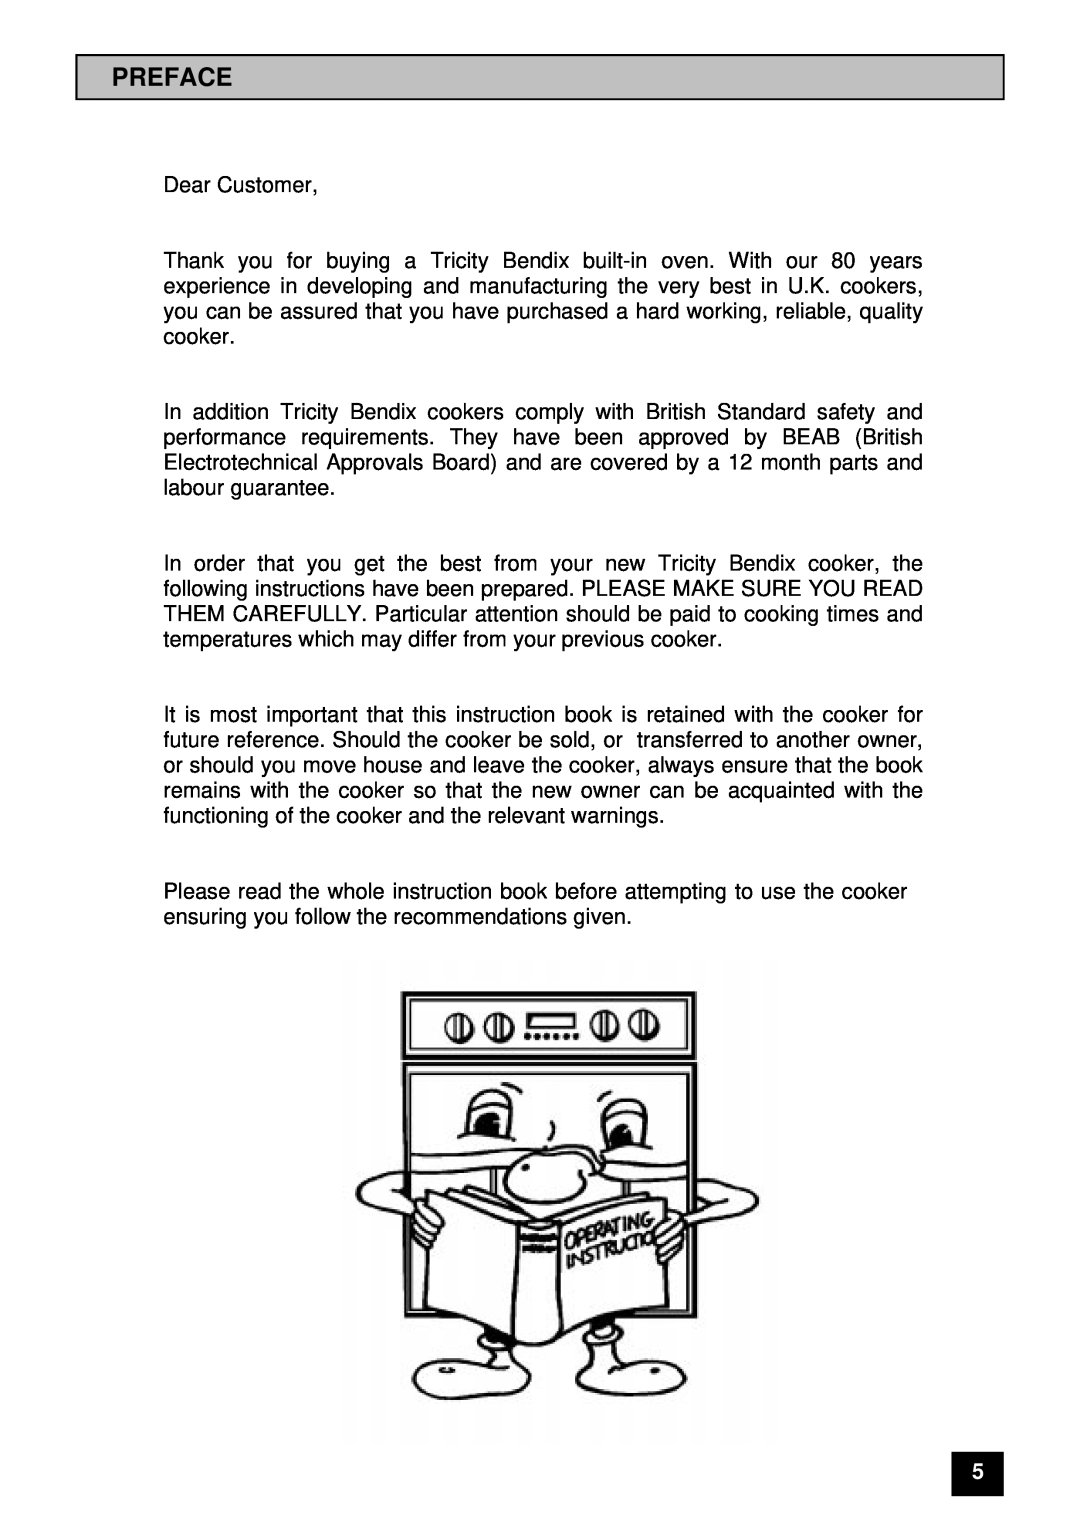 Tricity Bendix BS 613/2 installation instructions Preface 